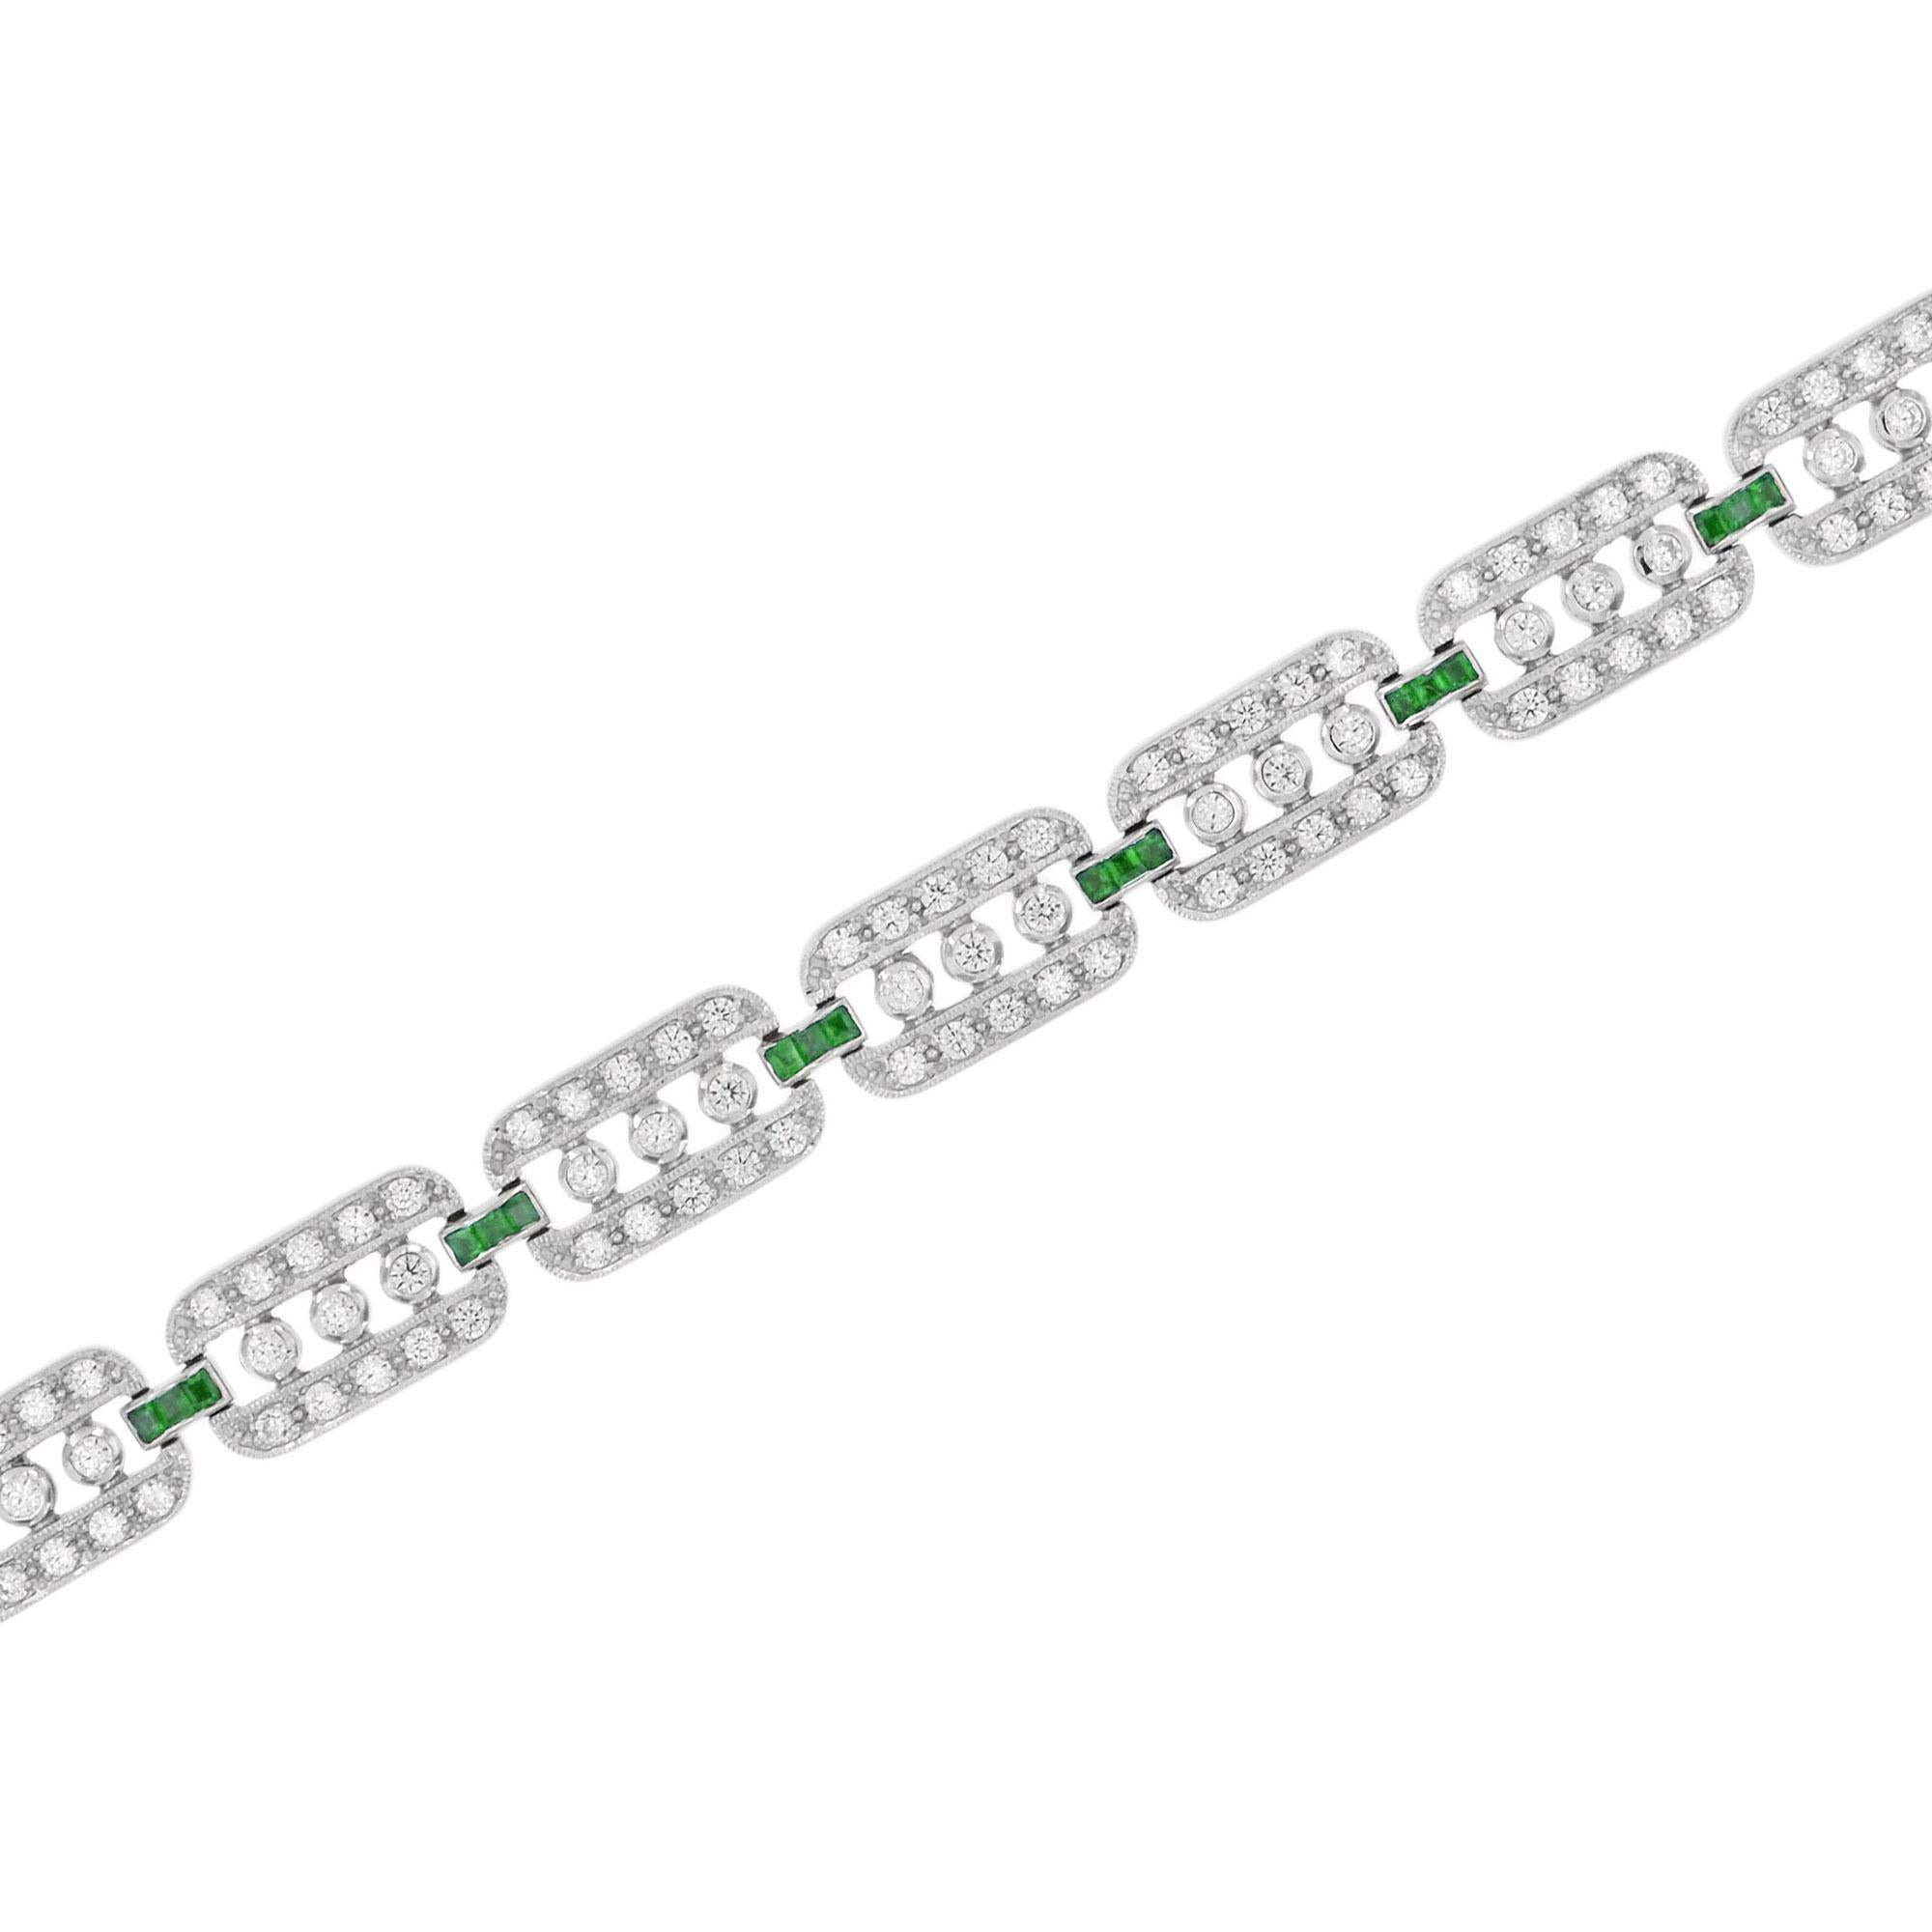 Handcrafted out of stunning diamonds and emeralds, this bracelet is perfect for evening or day wear. Each individual section features round diamonds and is separated from its neighbor with a French cut emeralds line. This wonderful piece is a